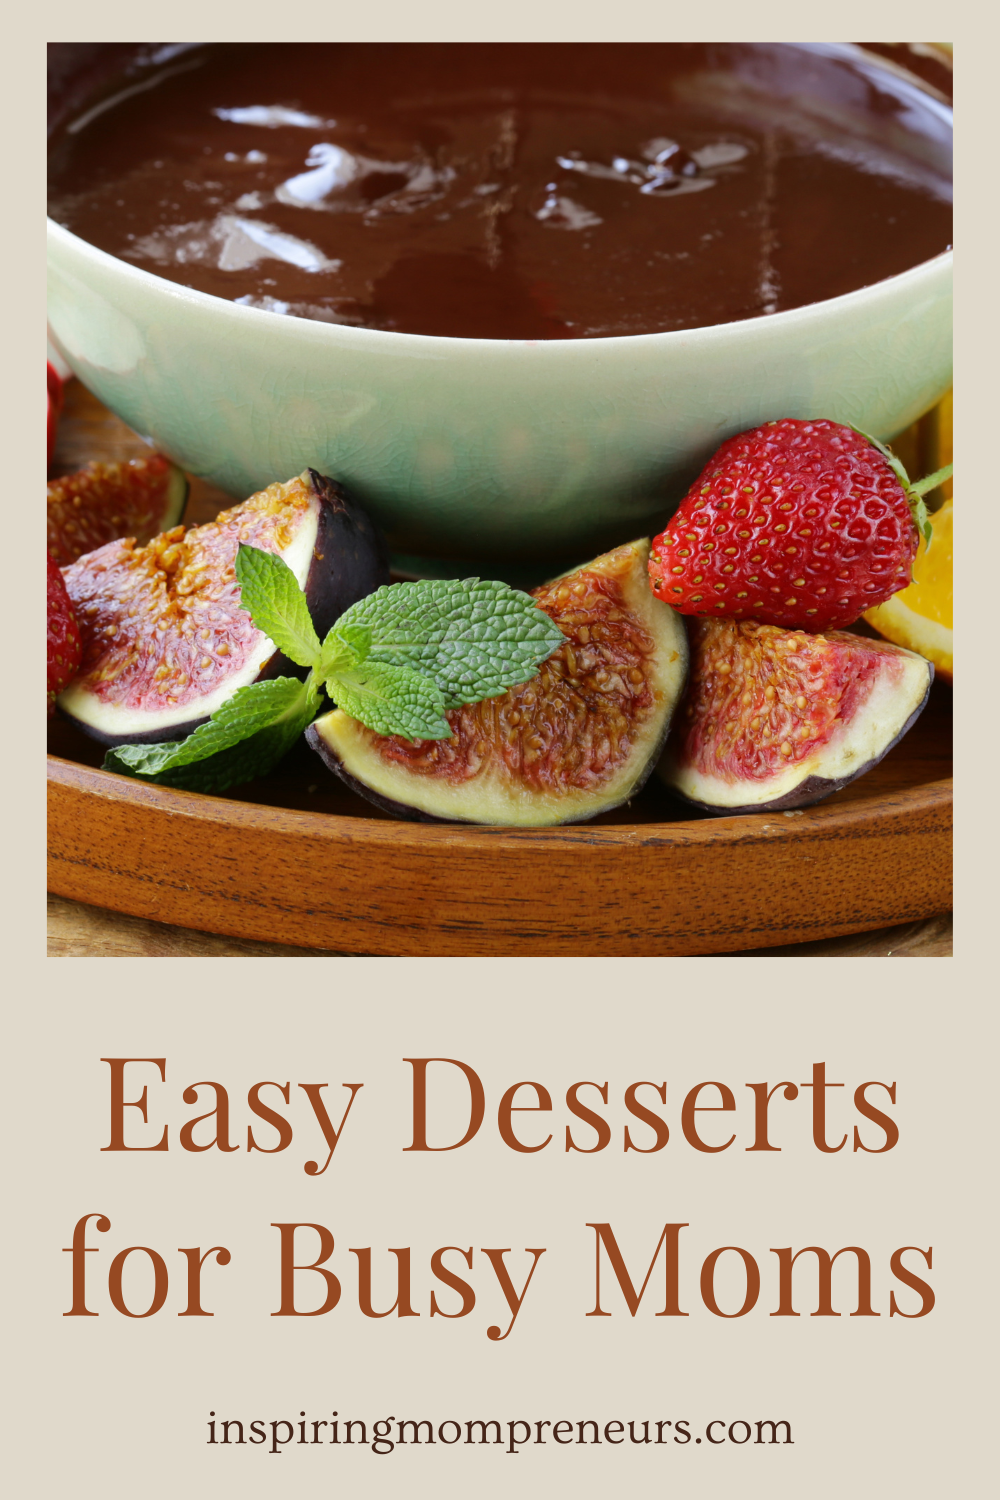 This article by Lana Hawkins, busy mom of two, offers 10 easy dessert recipes for busy moms that are guaranteed to bring smiles to the dinner table.